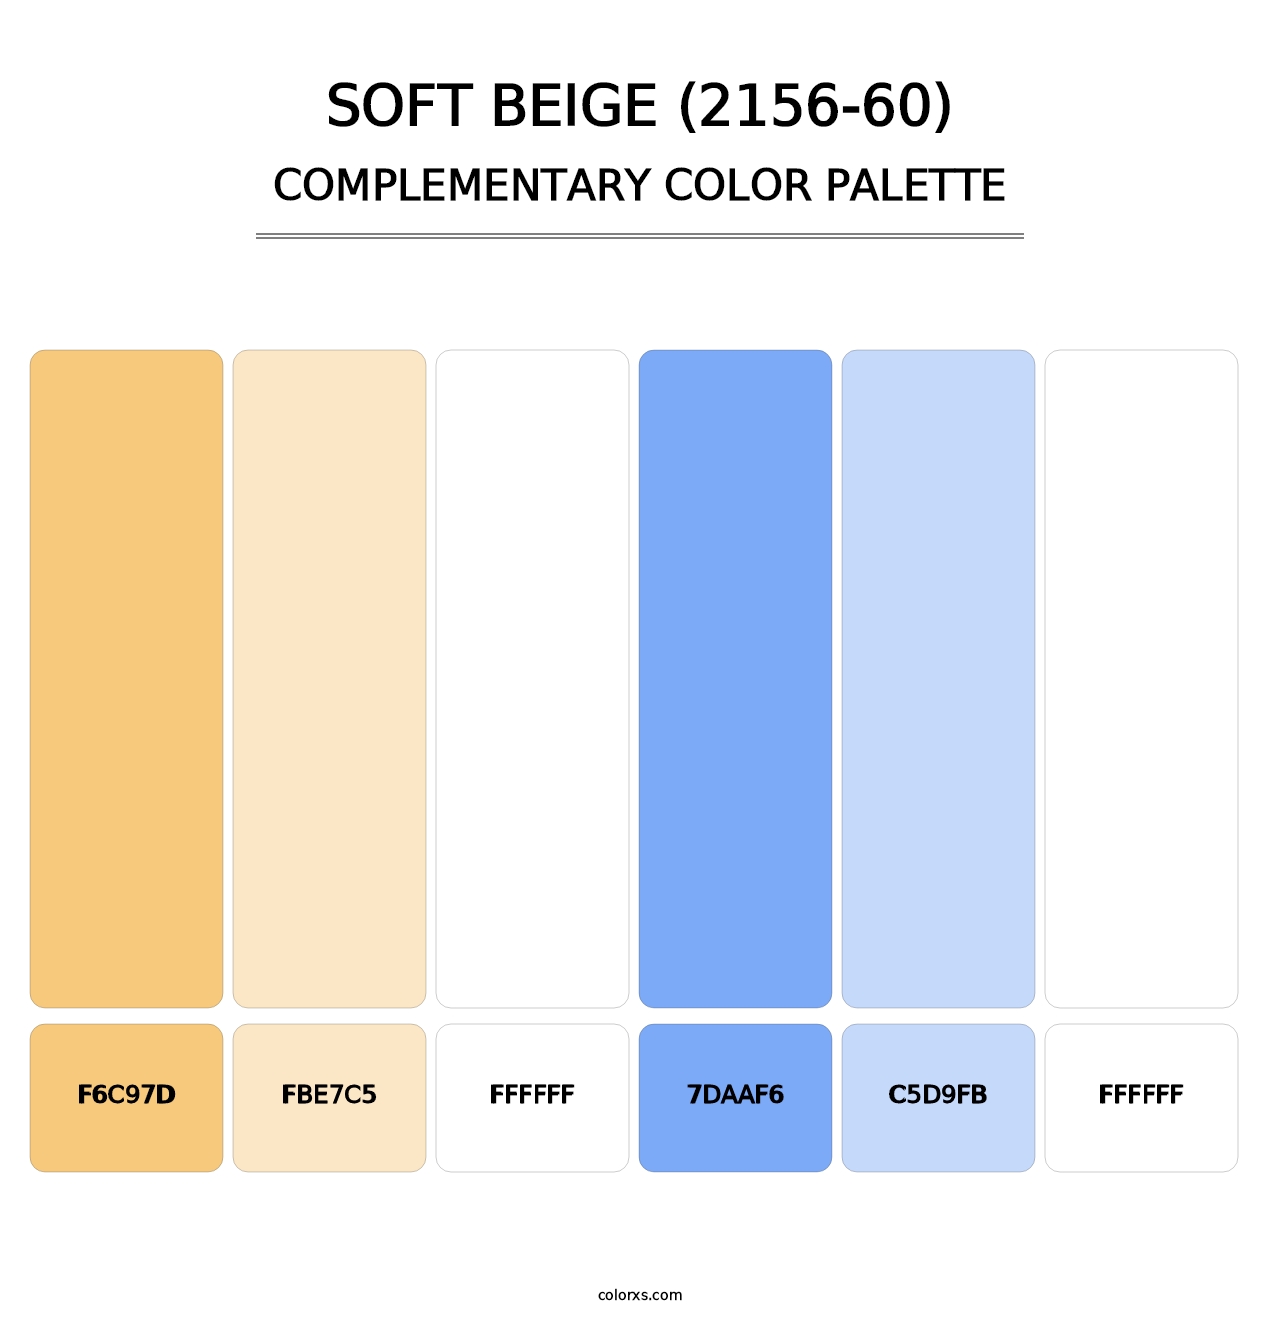 Soft Beige (2156-60) - Complementary Color Palette